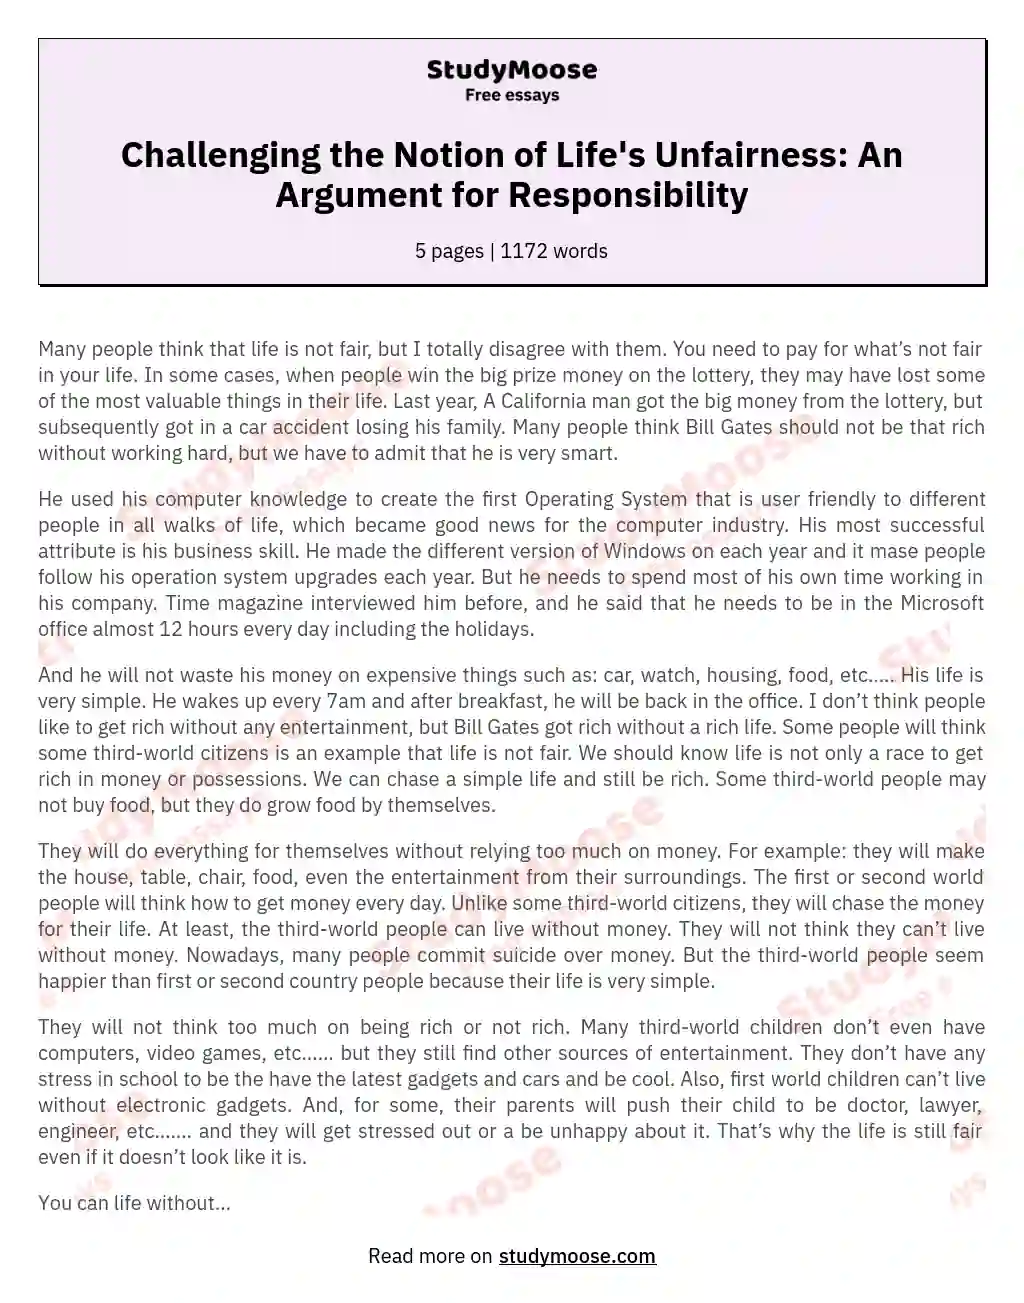 Challenging the Notion of Life's Unfairness: An Argument for Responsibility essay